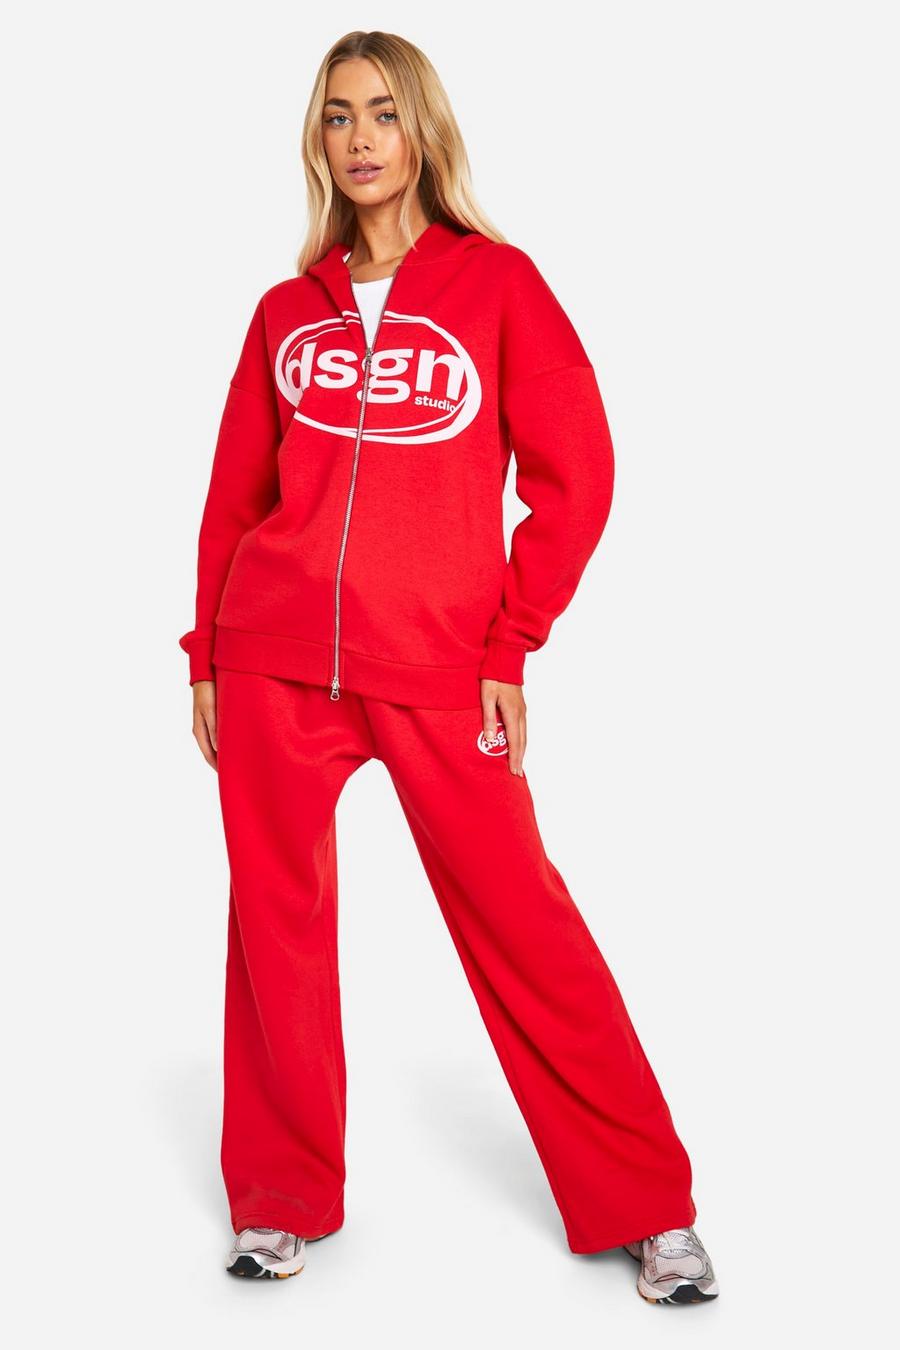 Red Dsgn Studio Oval Print Cuffed Oversized Track Pants image number 1